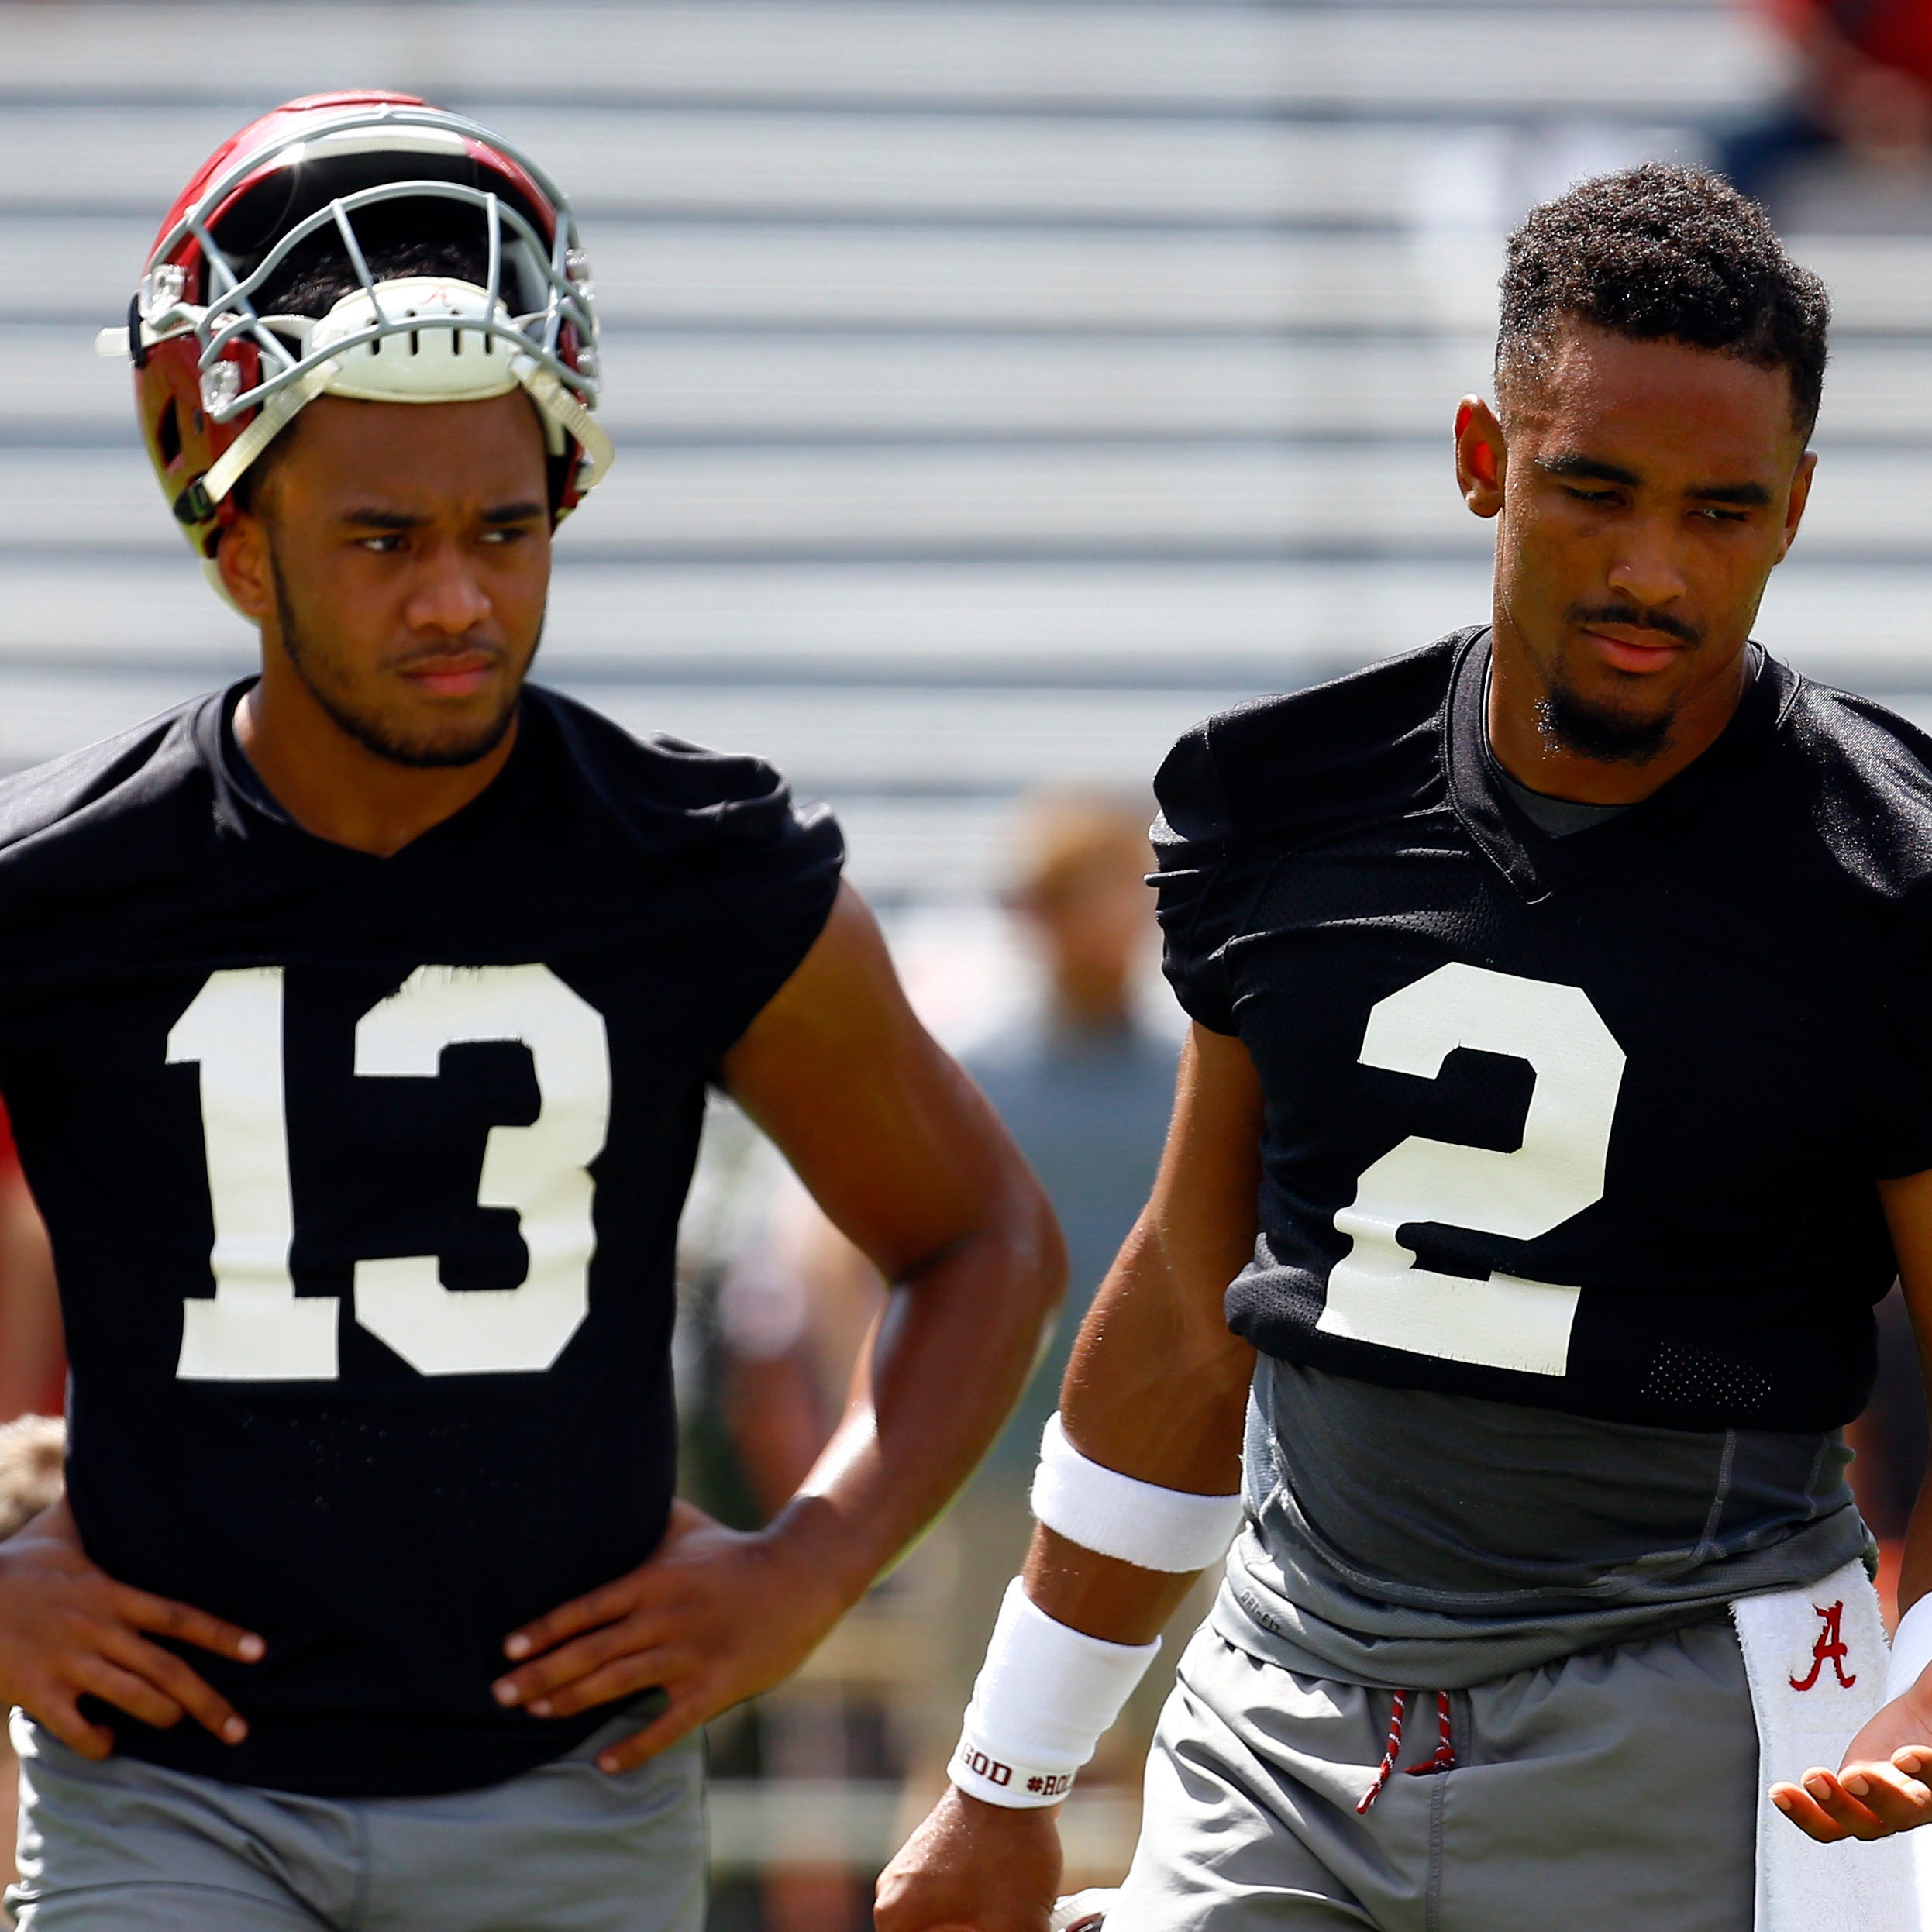 Alabama quarterback Tua Tagovailoa stands next to Jalen Hurts (2) during the team's practice this month.